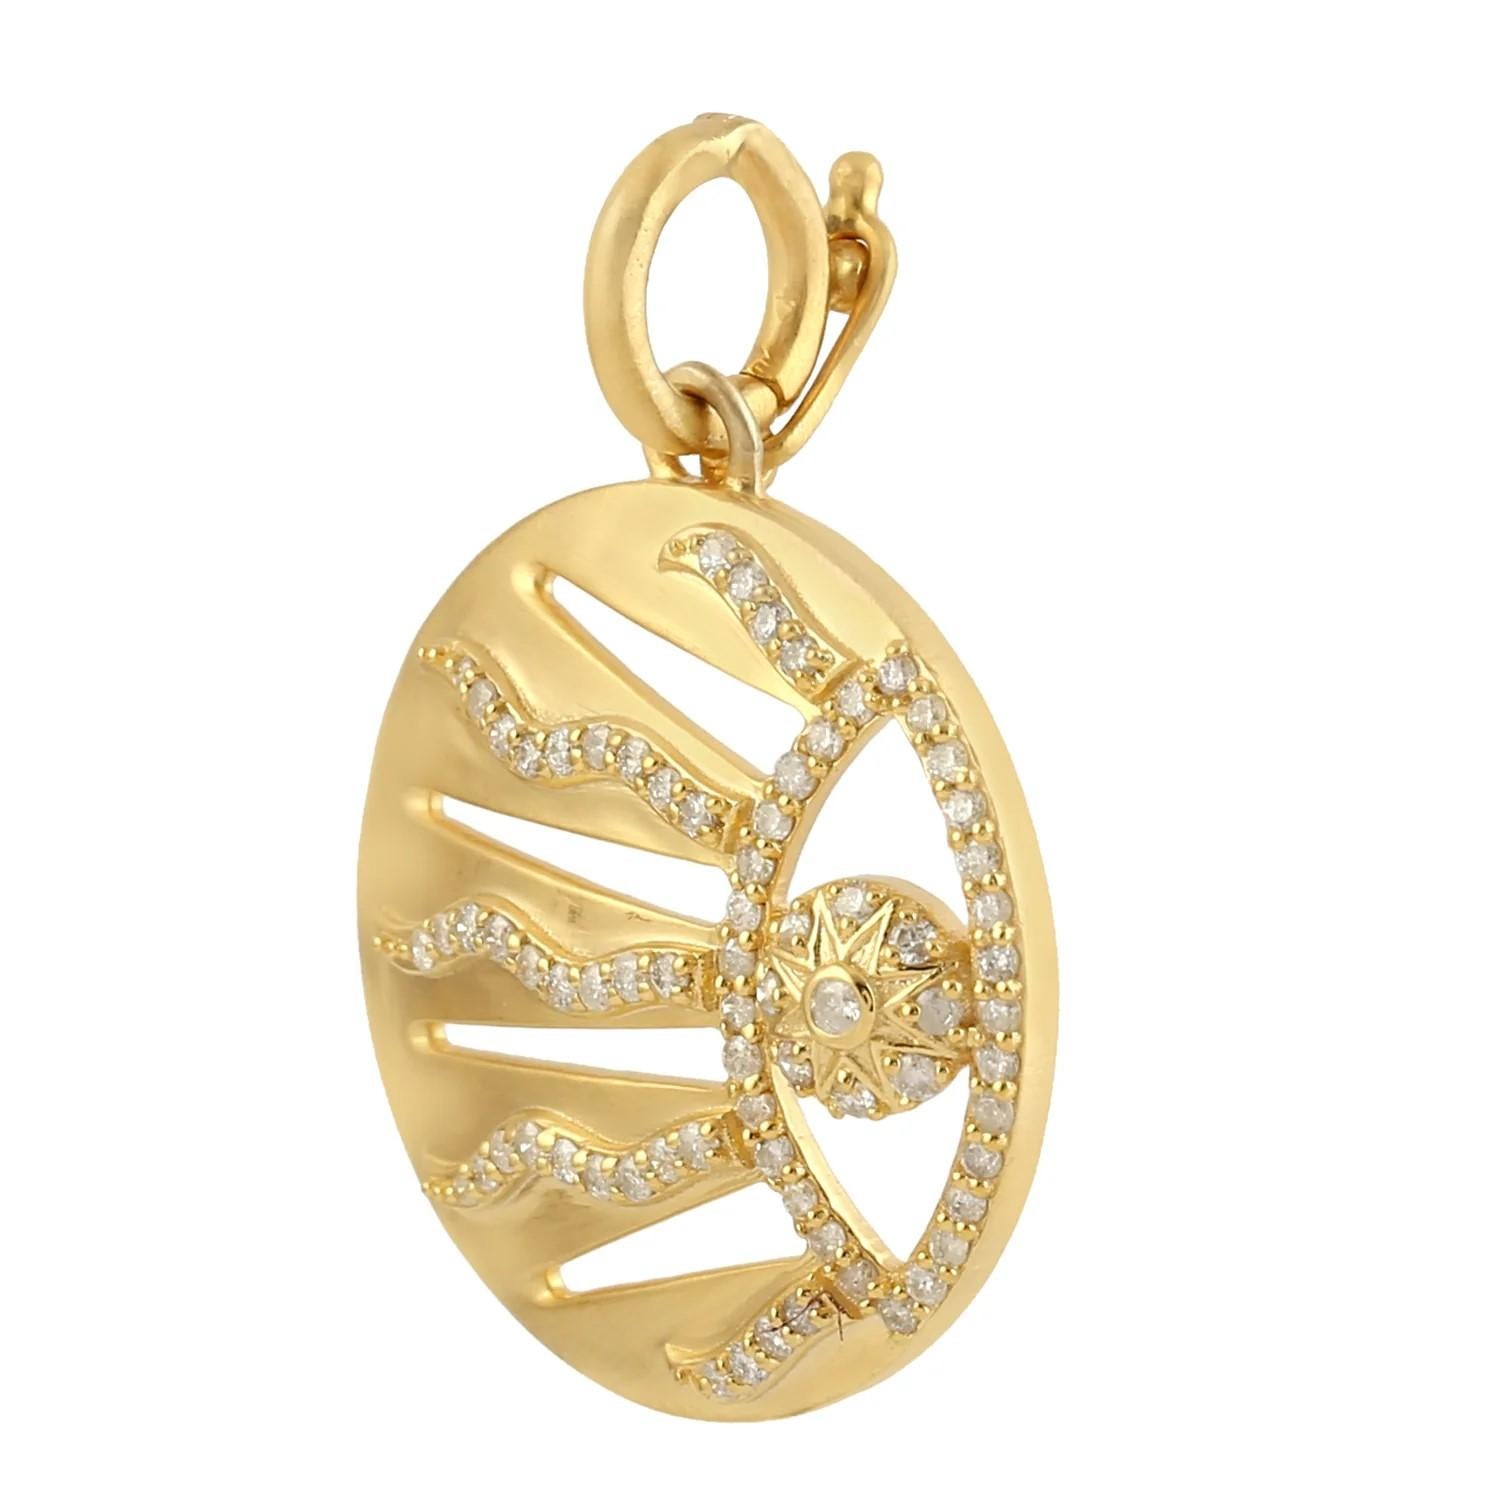 The 14 karat gold pendant is hand set with .38 carats of sparkling diamonds.

FOLLOW MEGHNA JEWELS storefront to view the latest collection & exclusive pieces. Meghna Jewels is proudly rated as a Top Seller on 1stdibs with 5 star customer reviews.